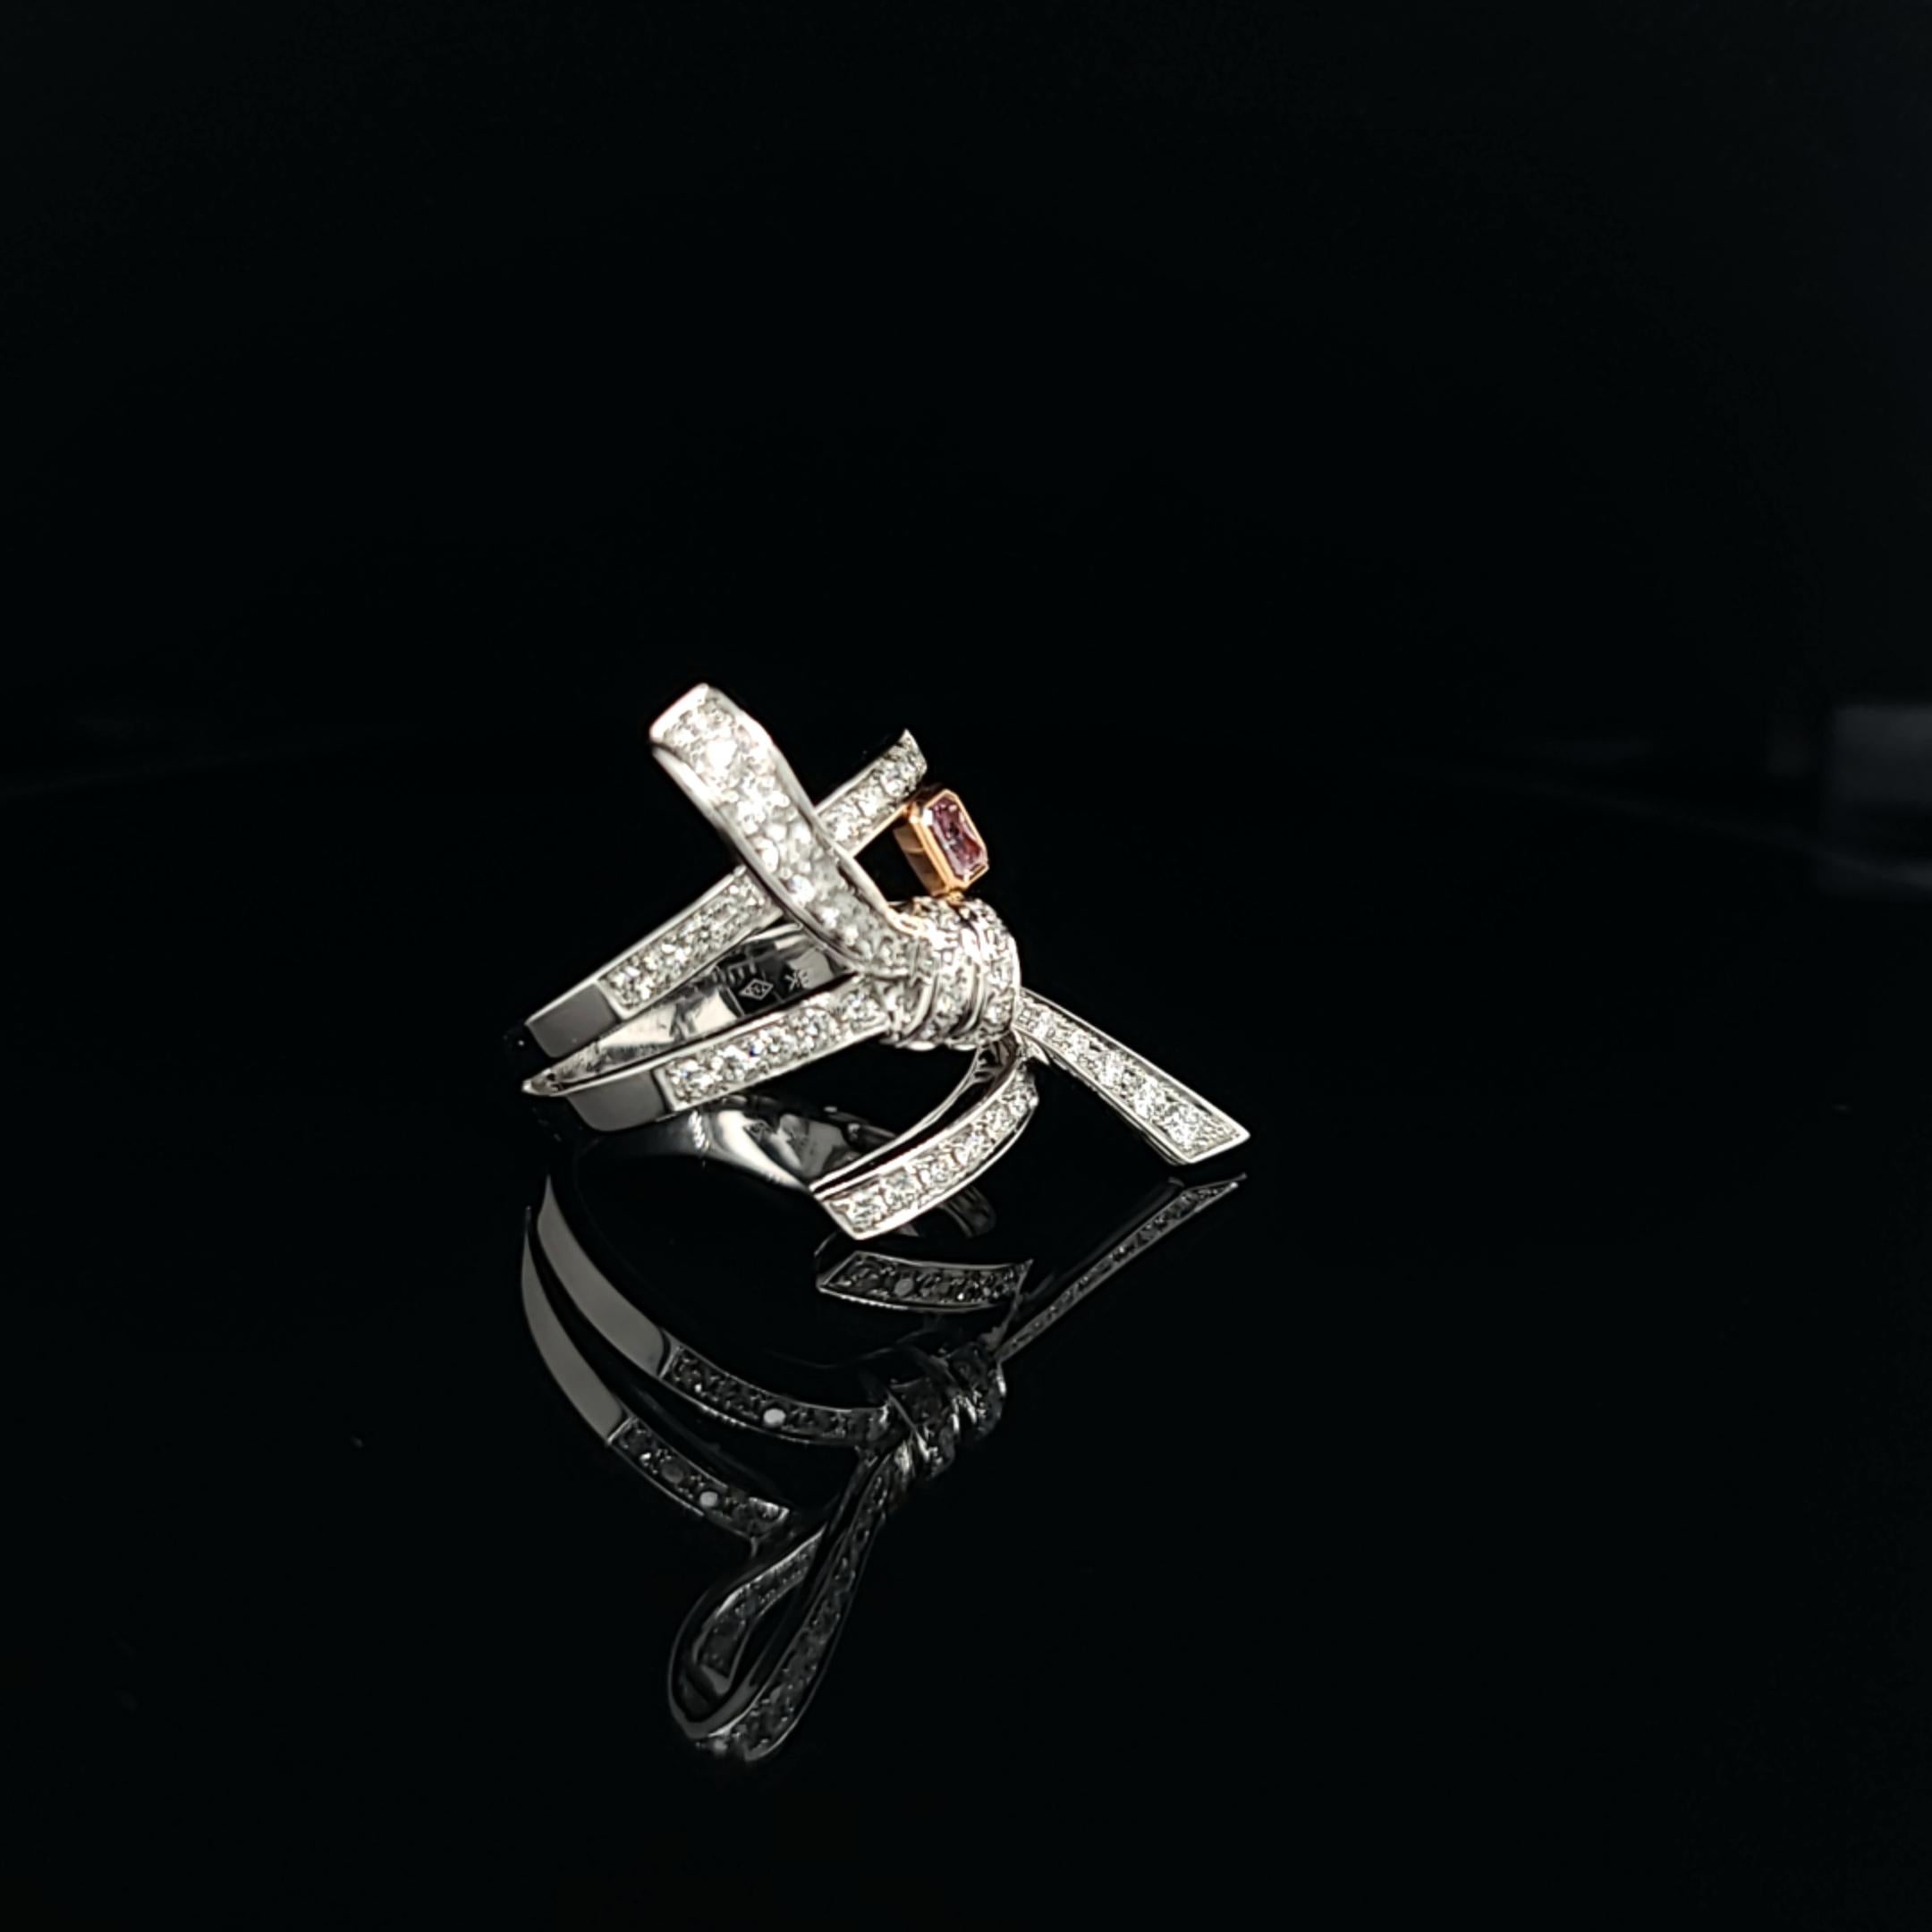 Bow ring featuring a 0.31 carat pink diamond radiant accented by 1.00 carats white diamonds. Set in 18k rose and white gold. Stock size 6.5 and can be adjusted per request.